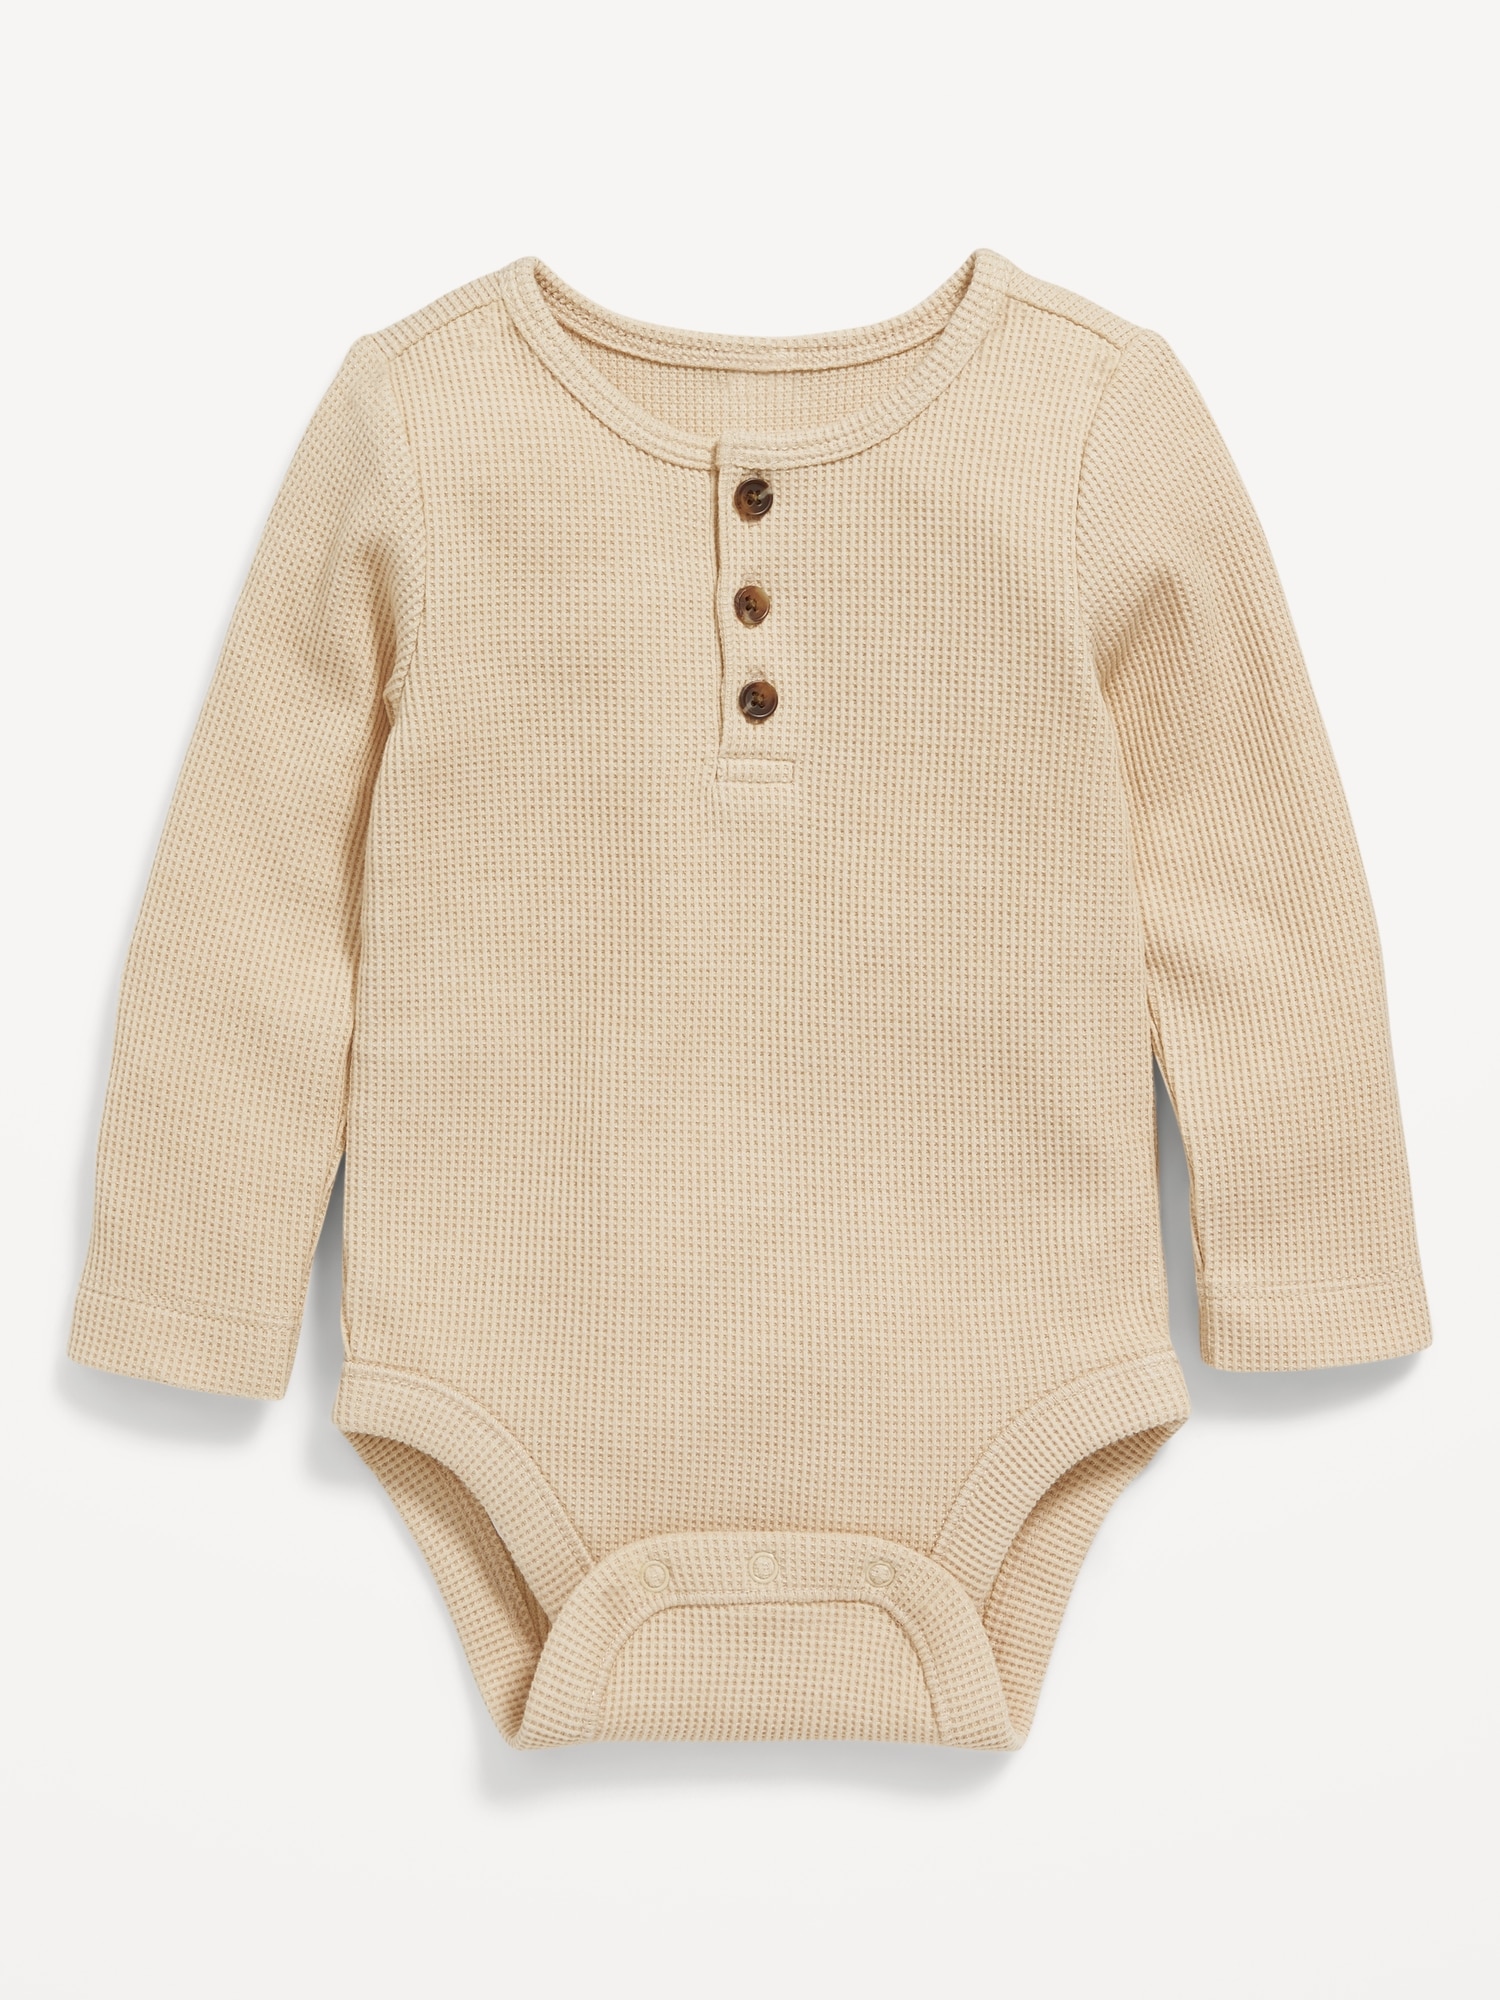 Unisex Long-Sleeve Thermal-Knit Henley Bodysuit for Baby | Old Navy